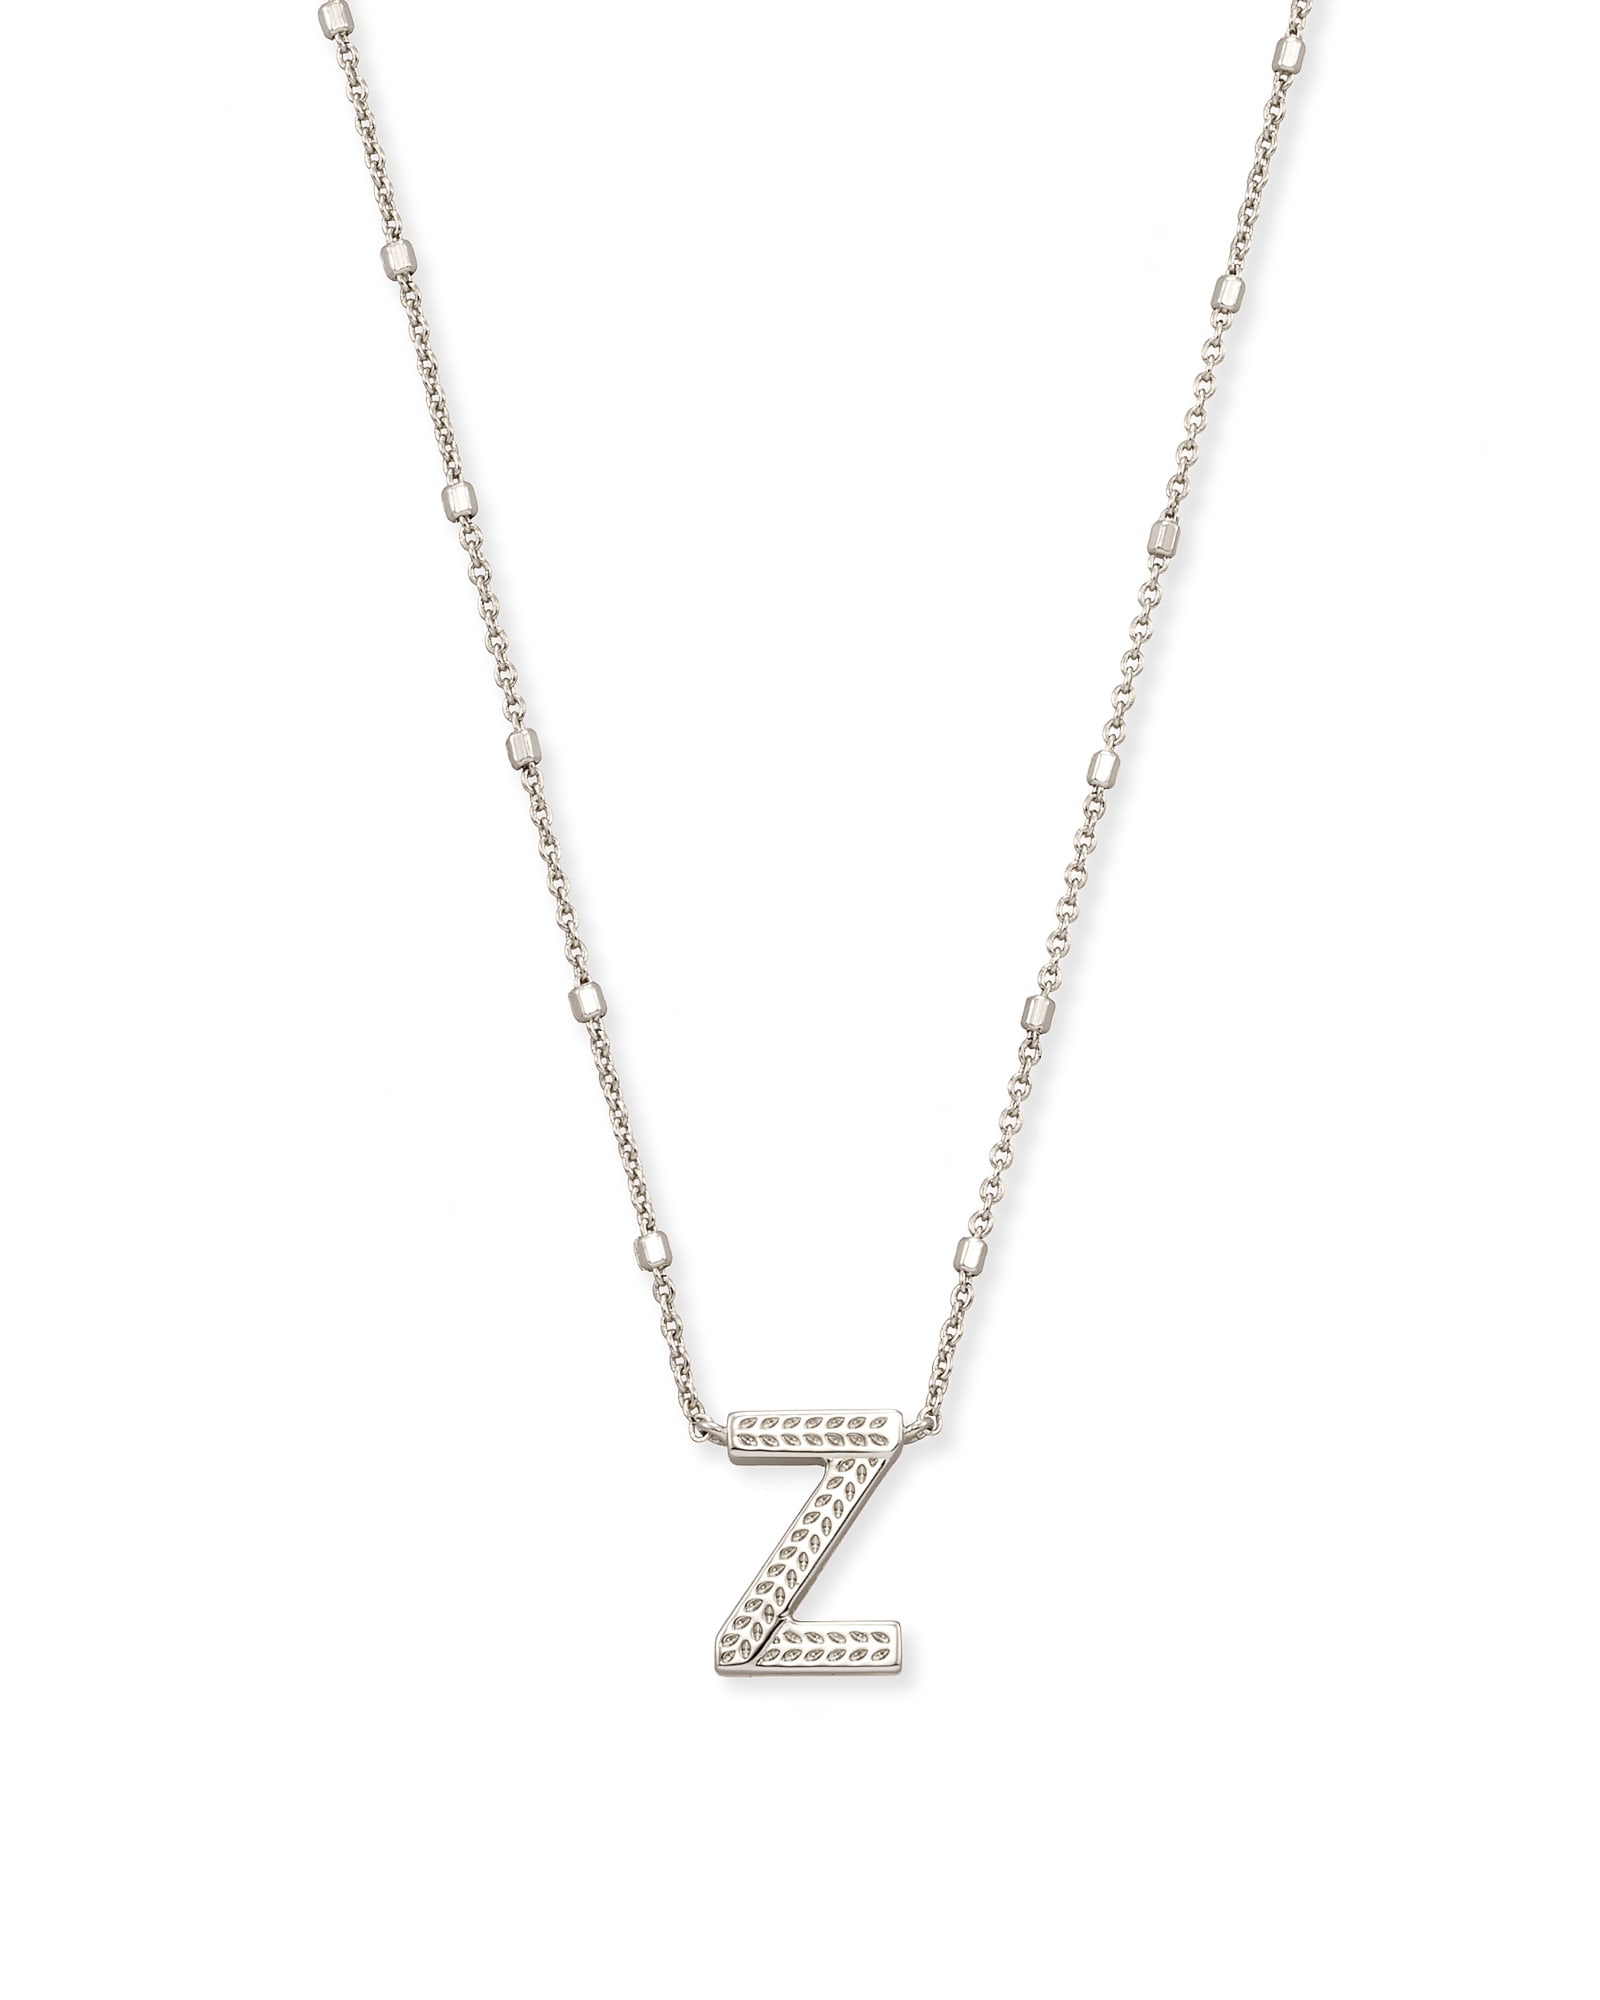 Kendra Scott Letter Z Pendant Necklace in Silver | Plated Brass/Metal Rhodium